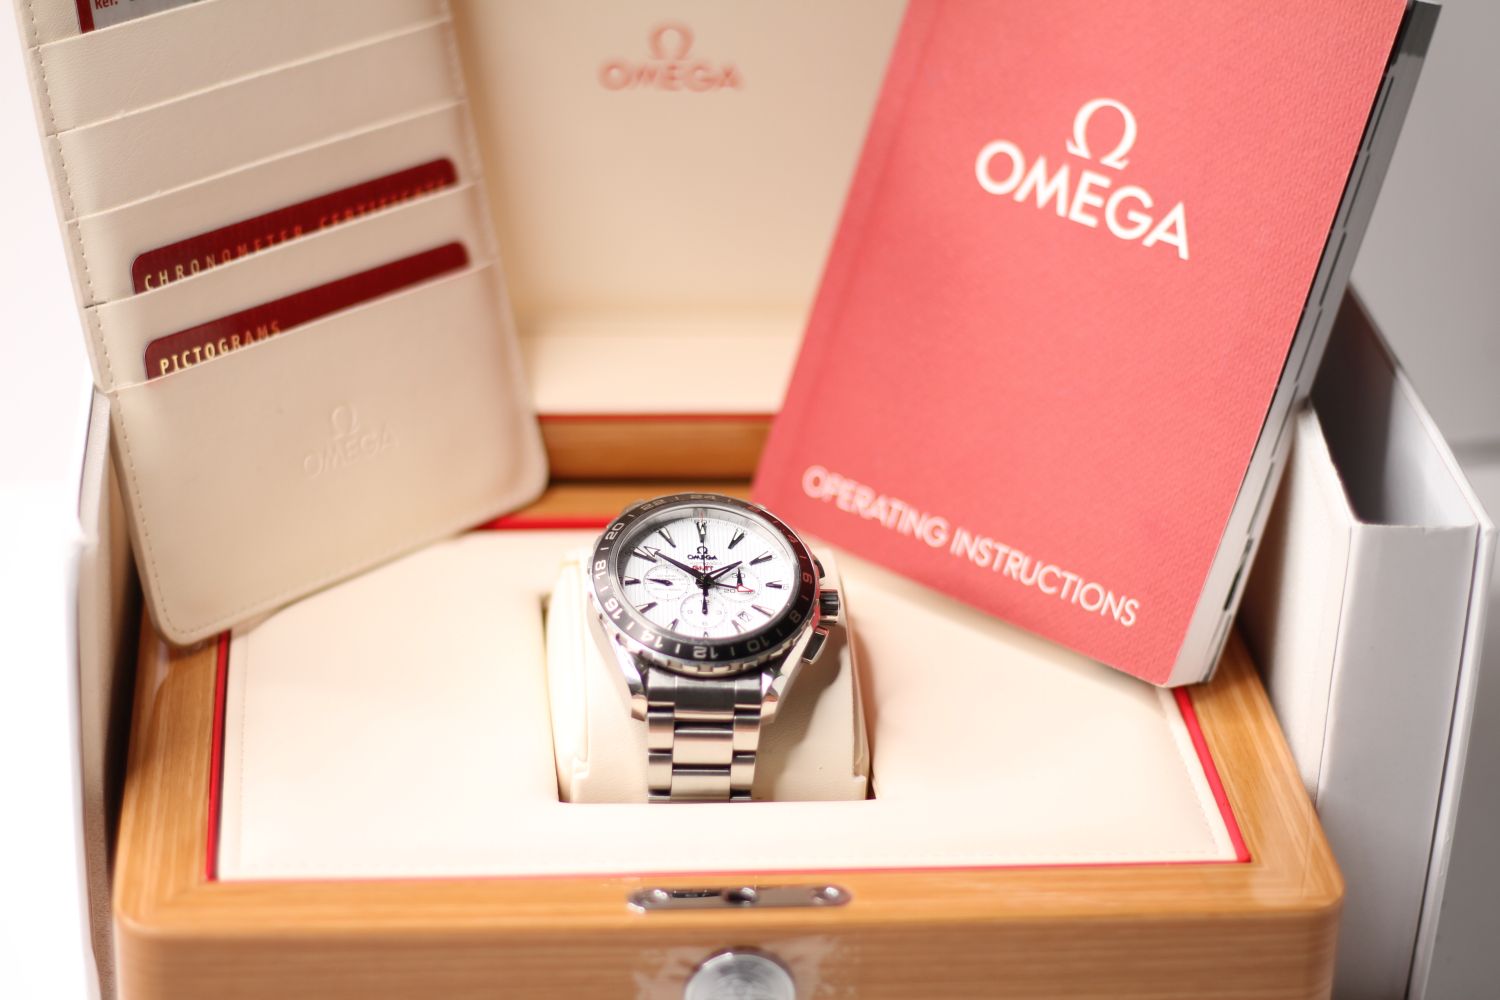 OMEGA SEAMASTER GMT AQUA TERRA CO-AXIAL WRISTWATCH REF 231.10.44.52.04.001 W/BOX & PAPERS, - Image 3 of 11